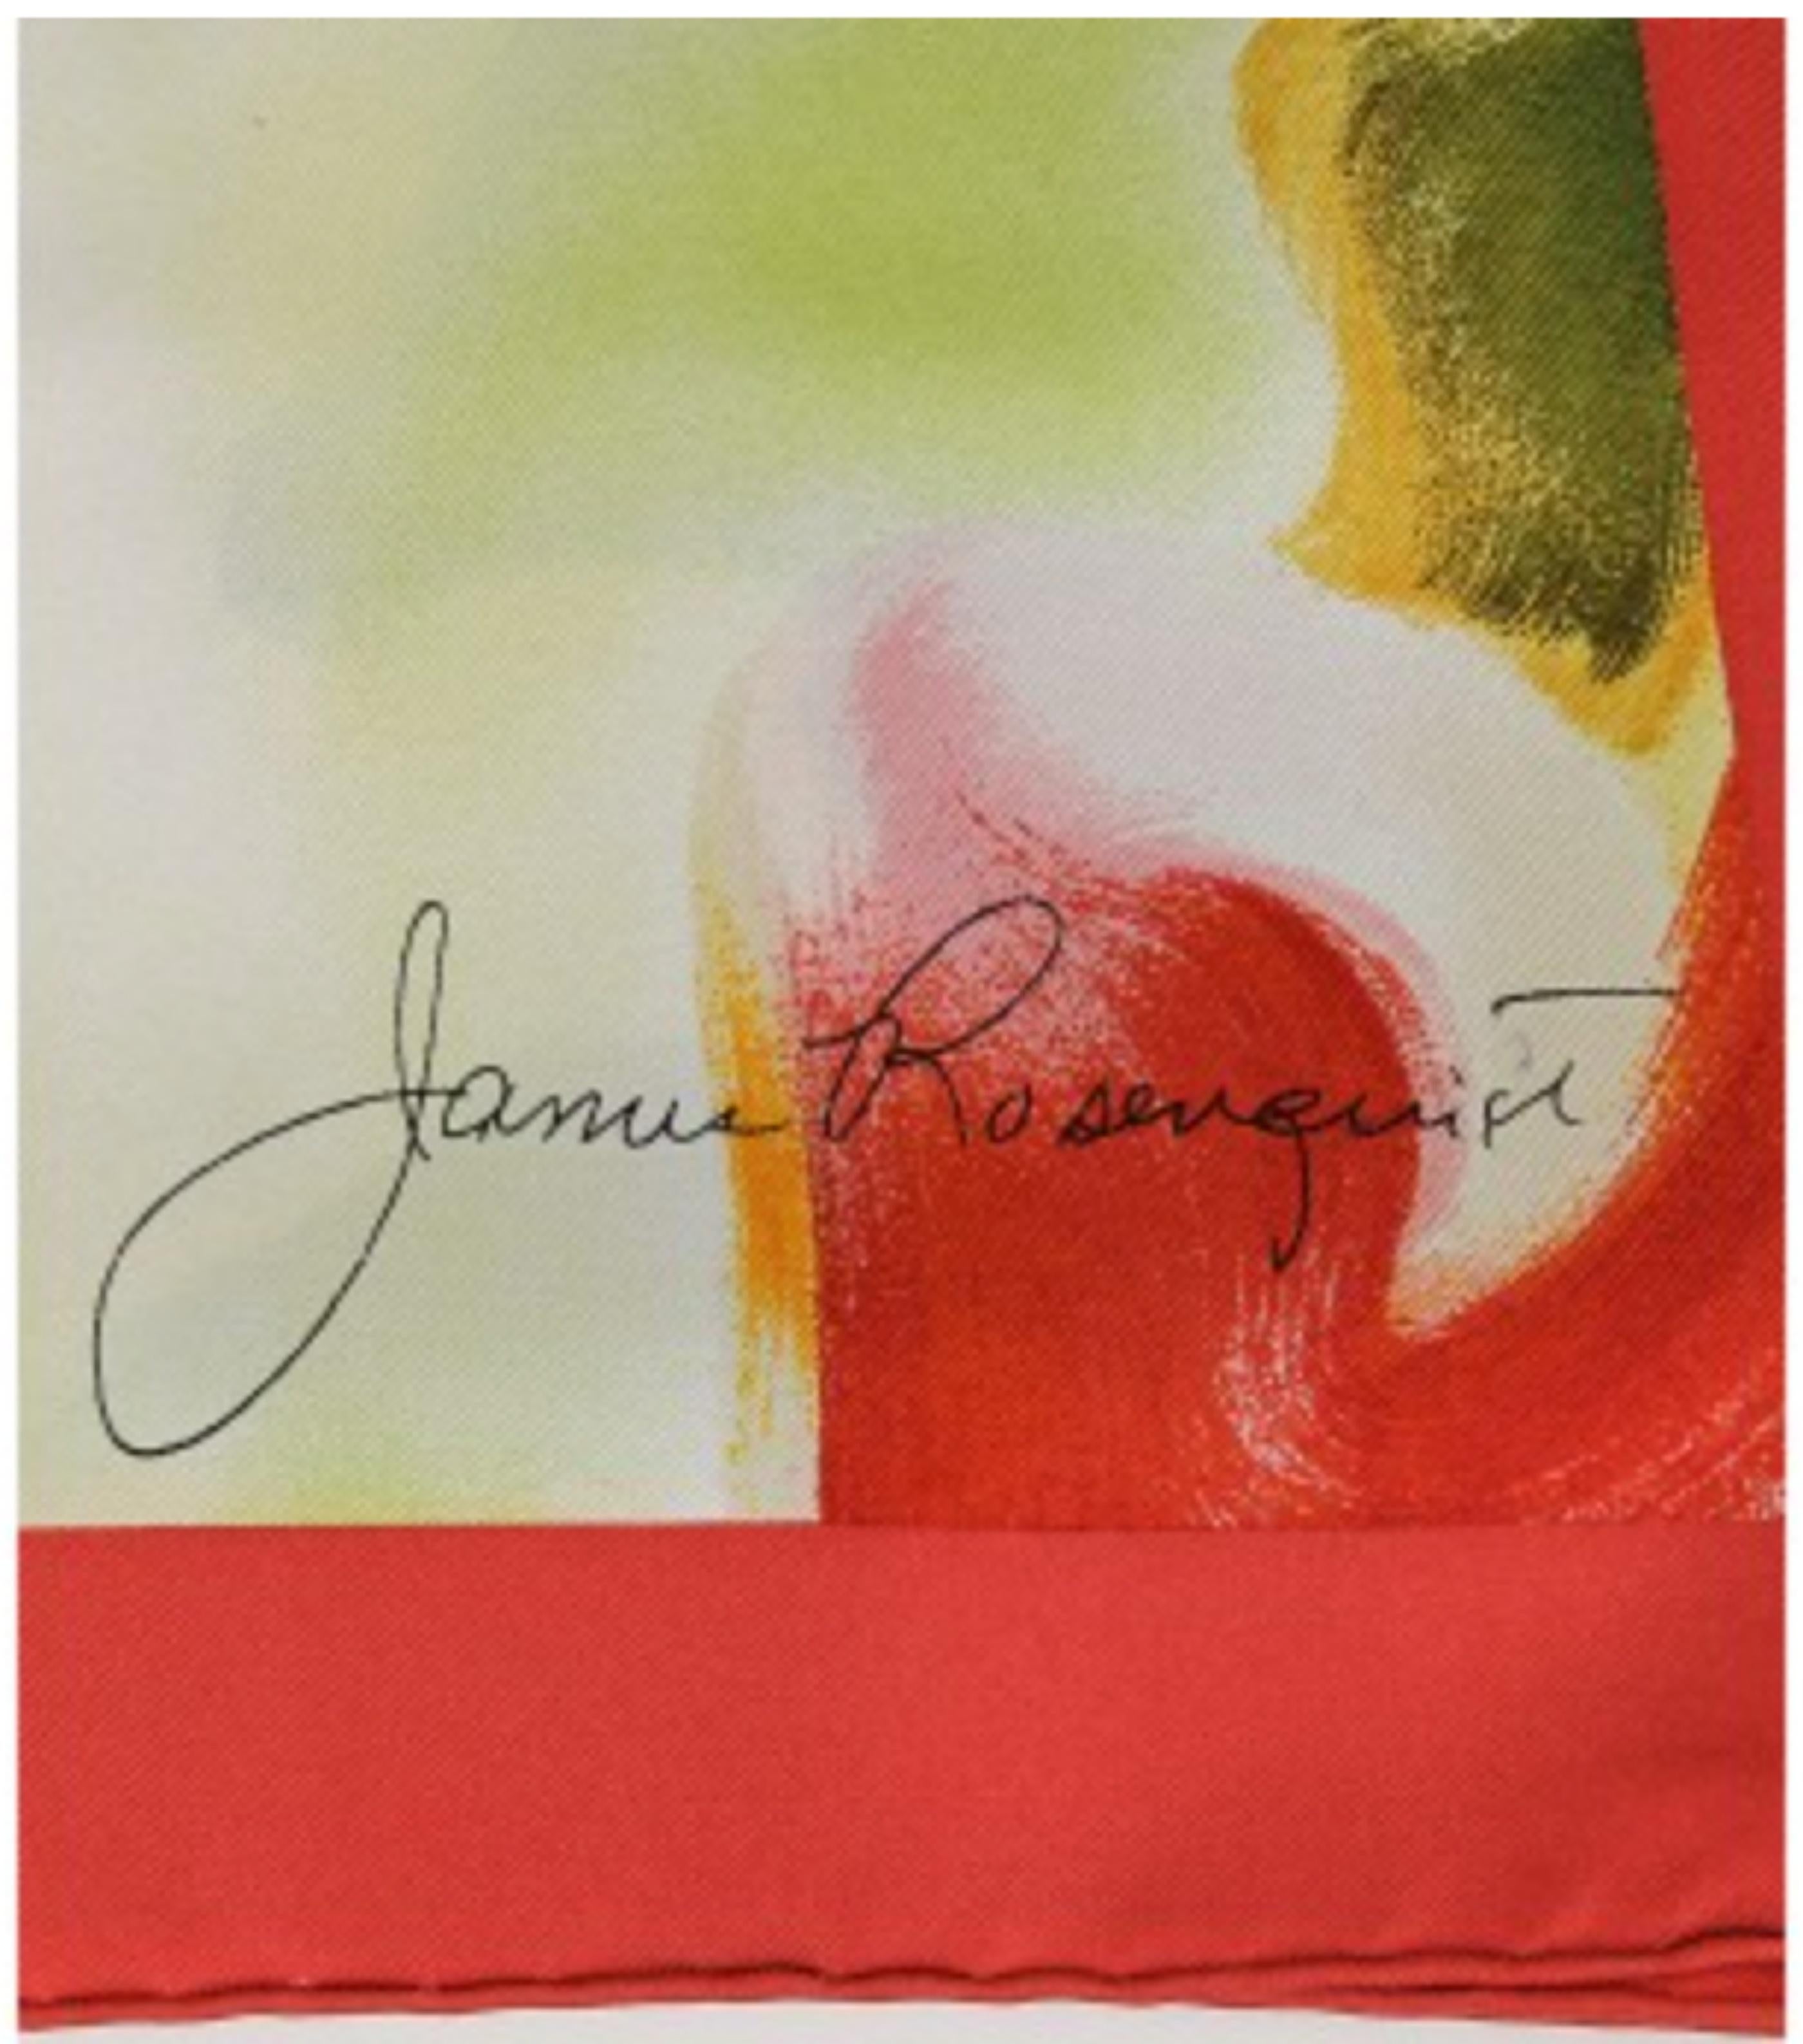  Louis Vuitton Limited Edition Silk Scarf designed by James Rosenquist For Sale 1